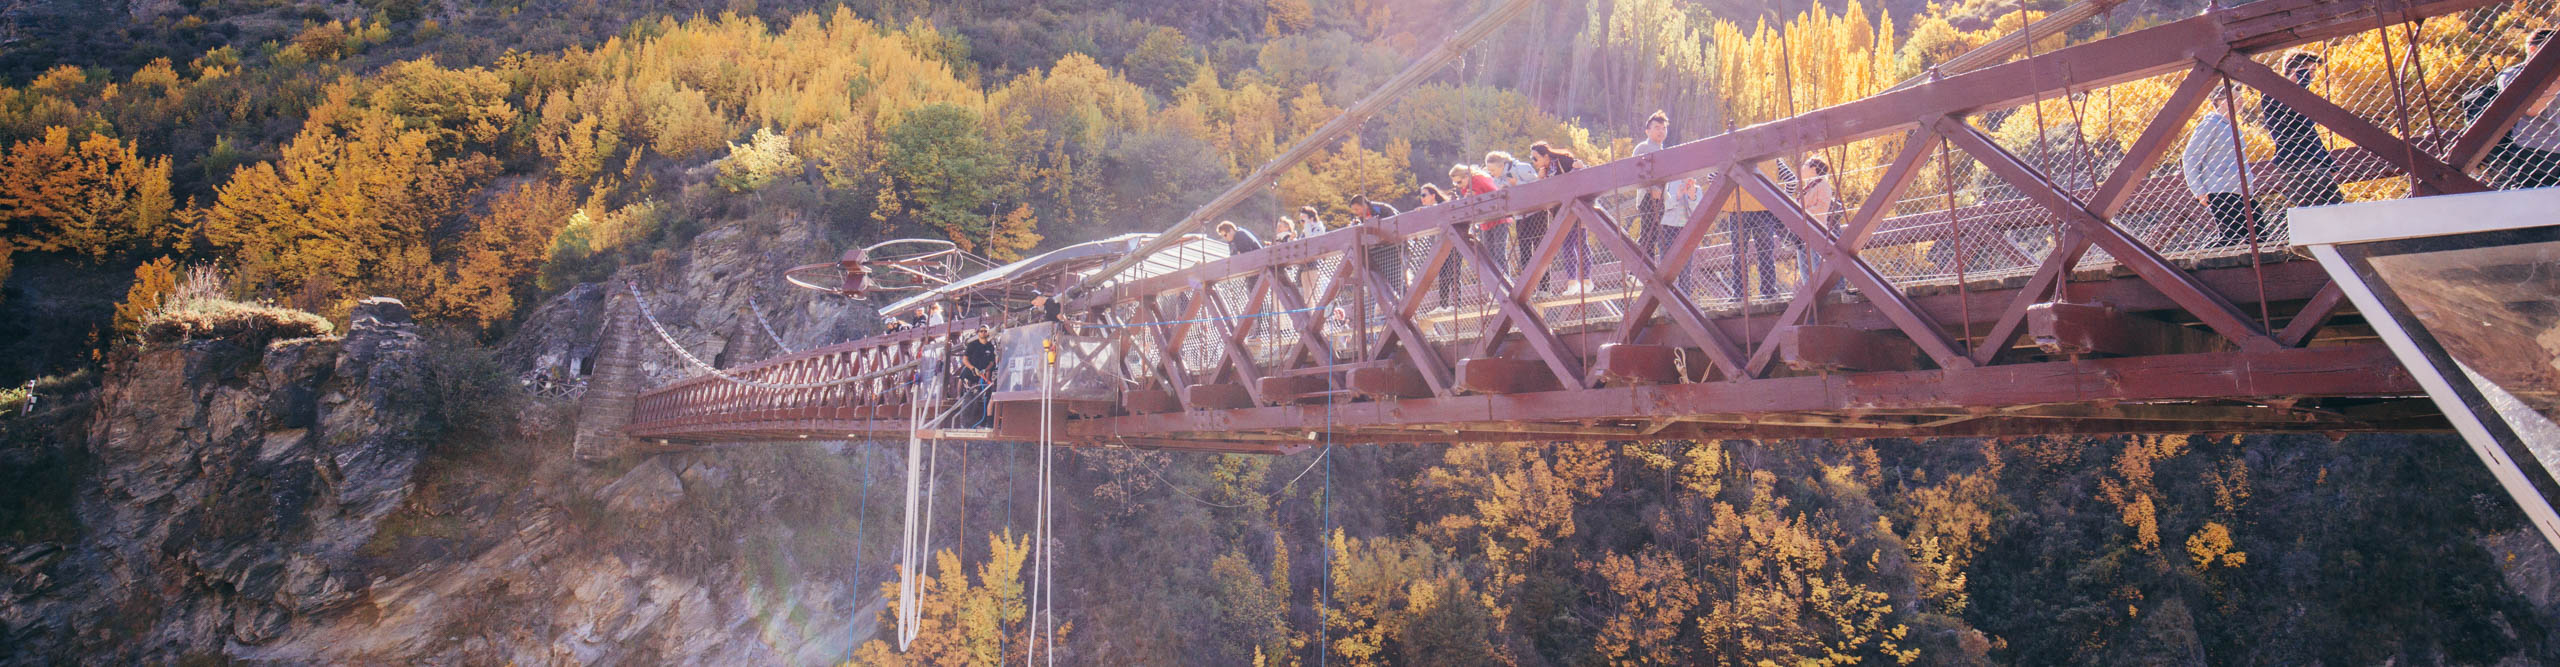 Queenstown bridge used for bungee-jumping